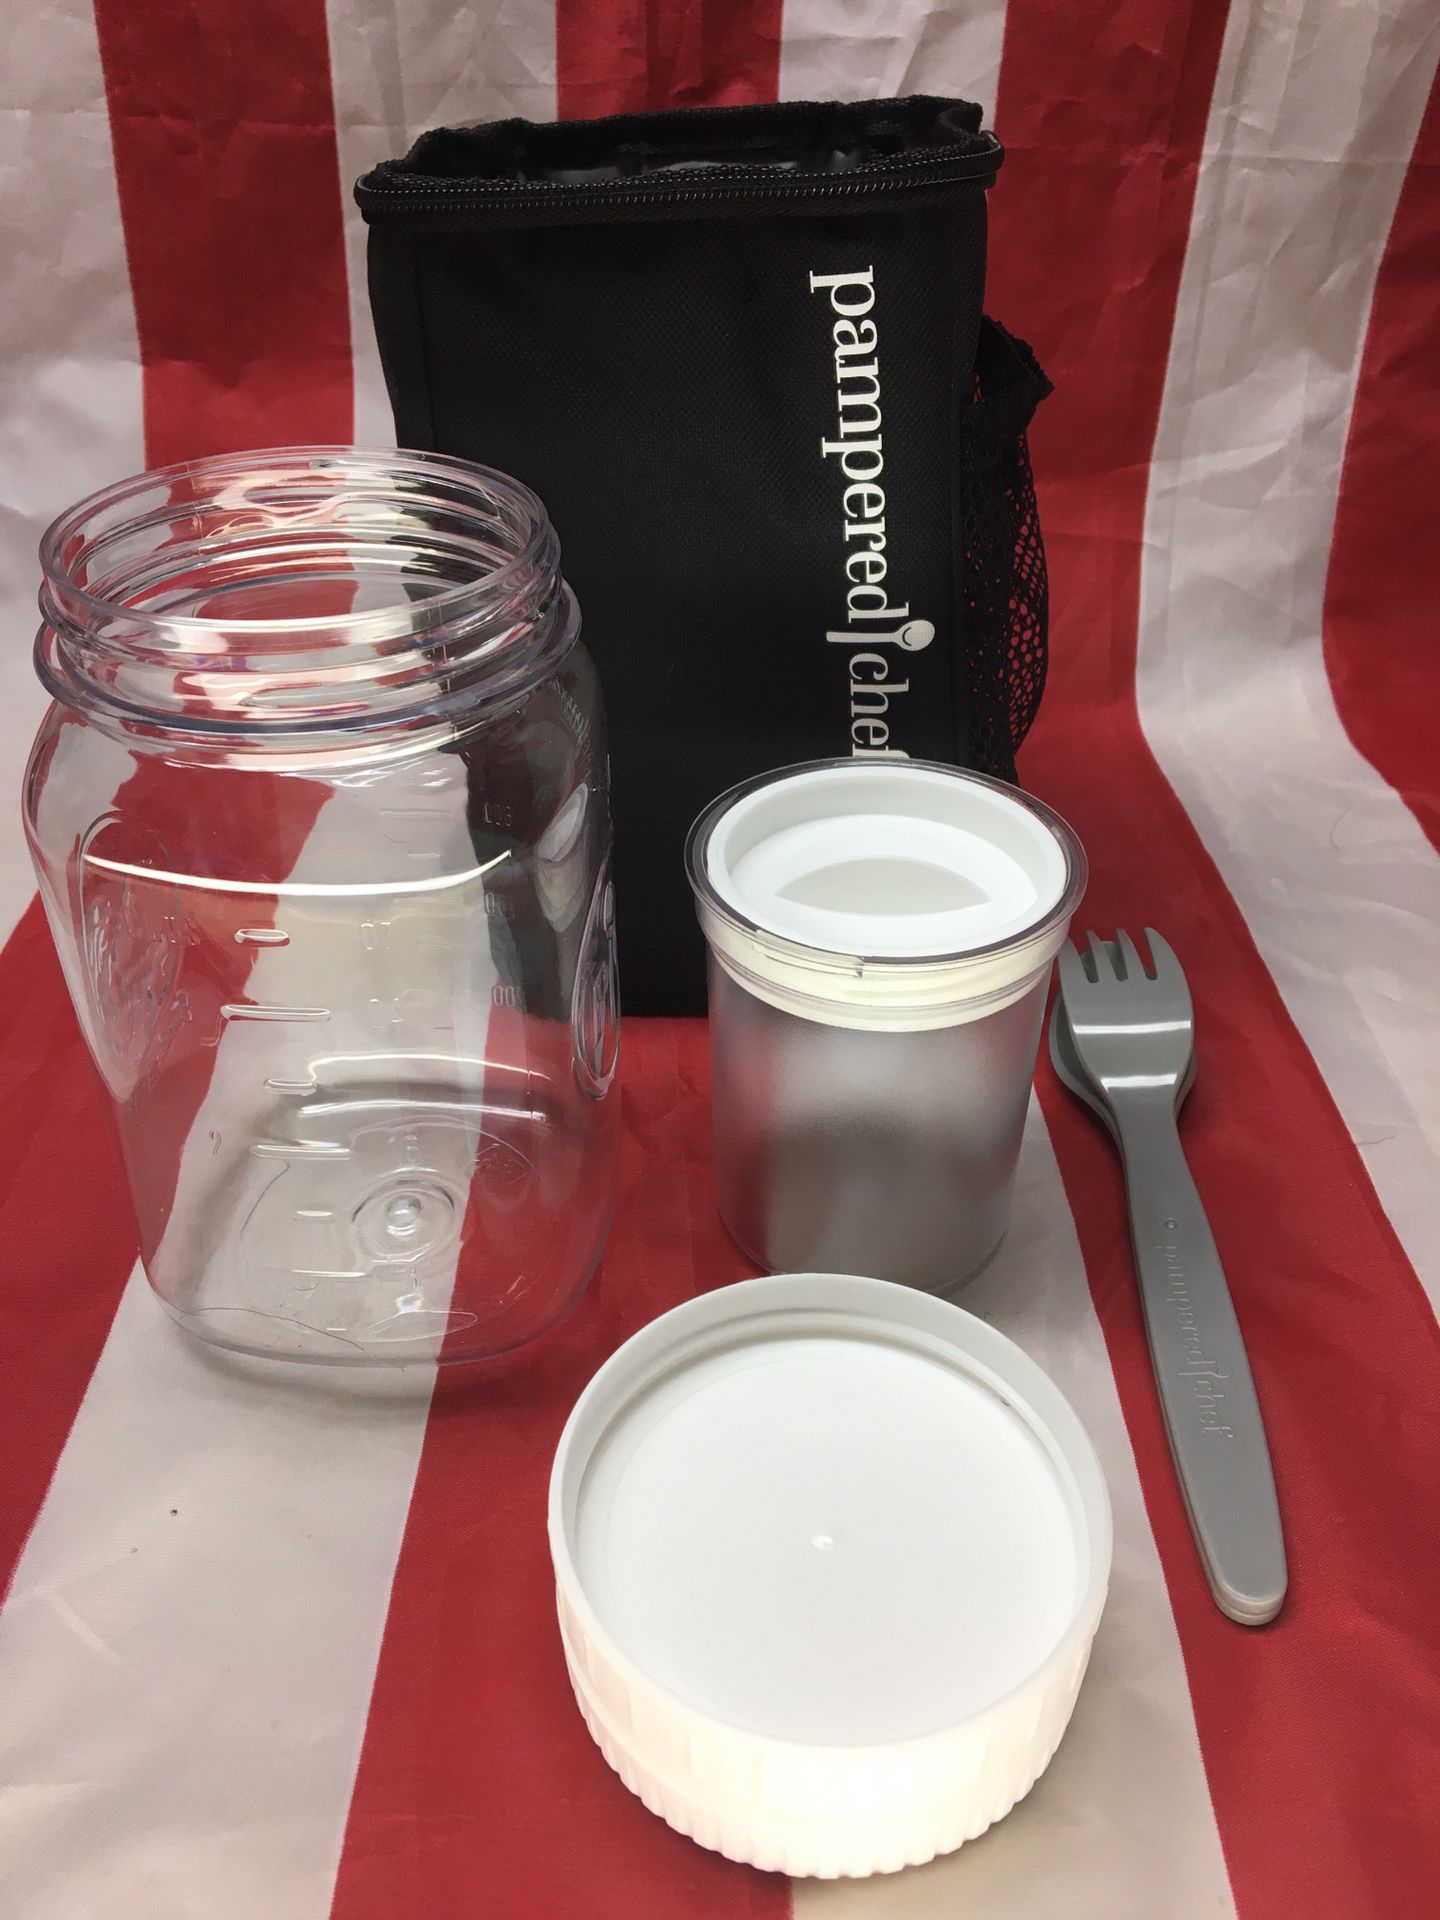 Pampered Chef lunch tote